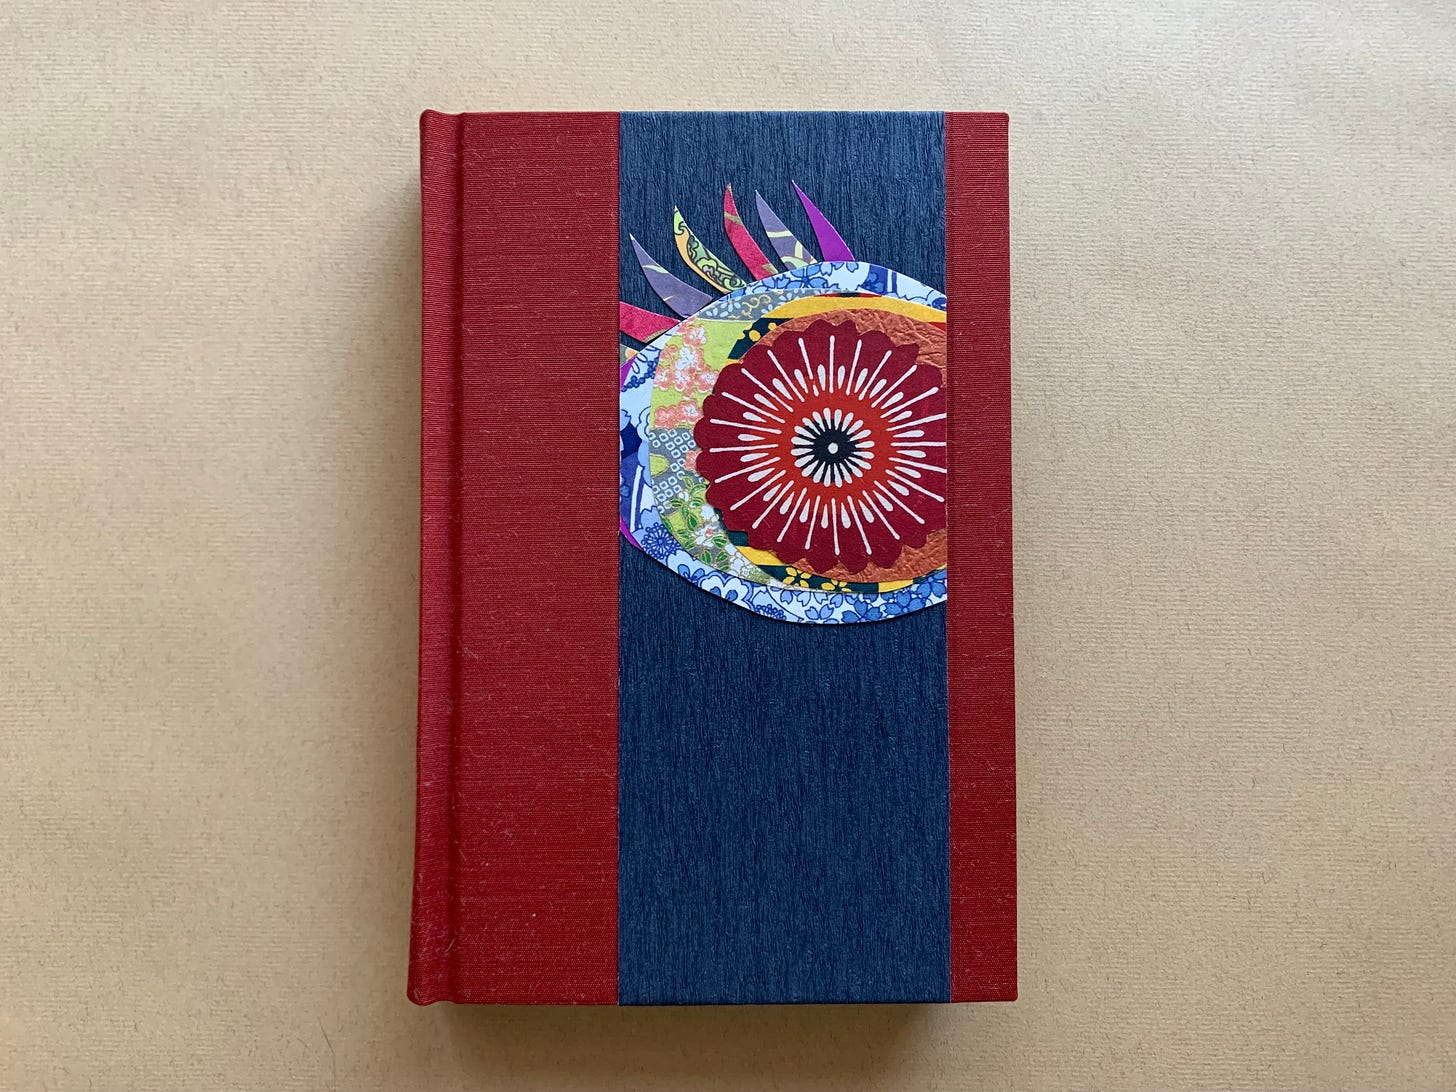 Photo of a handbound copy of ENDPAPERS. The cover features two vertical panels of brick-red silk book cloth with a strip of dark blue paper running between them to the right of center. On the paper is a collage of an eye made from rainbow-colored decorative papers.